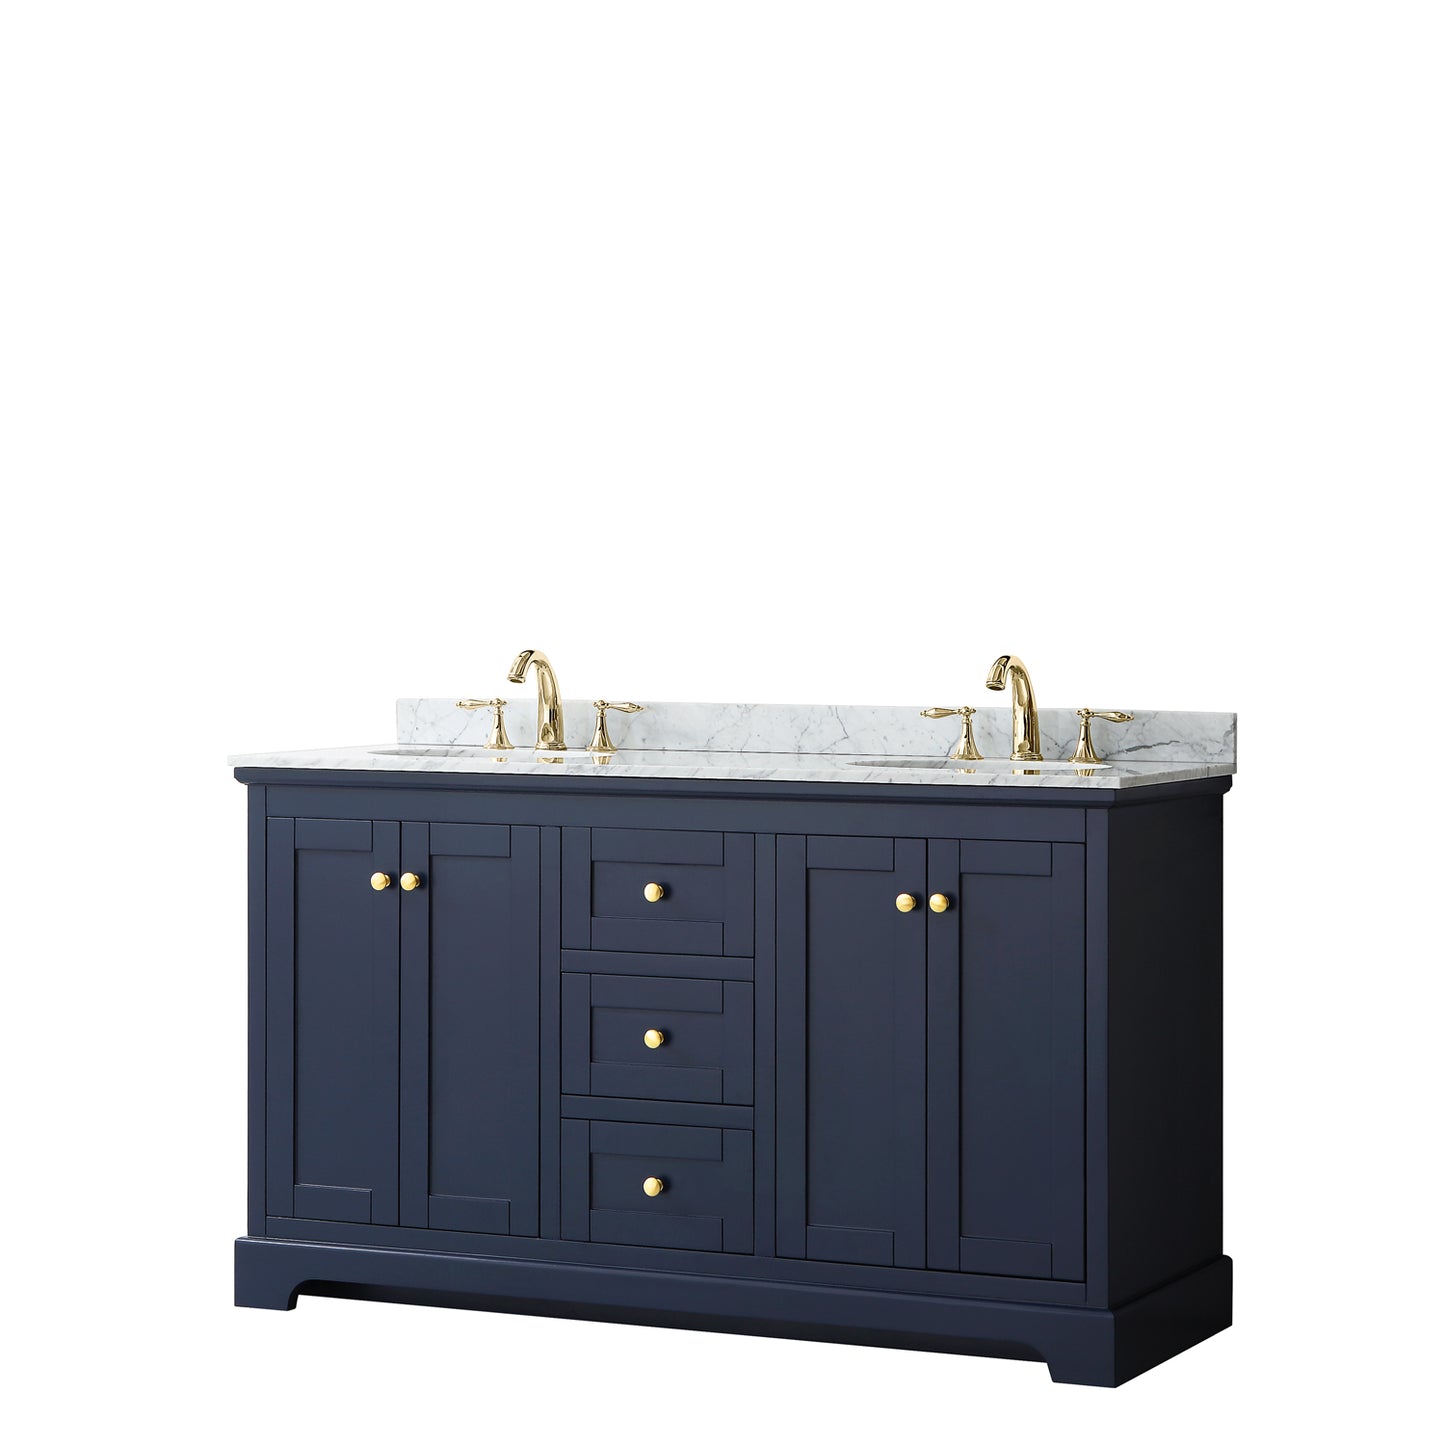 60 Inch Double Bathroom Vanity, White Carrara Marble Countertop, Undermount Oval Sinks, and No Mirror - Luxe Bathroom Vanities Luxury Bathroom Fixtures Bathroom Furniture